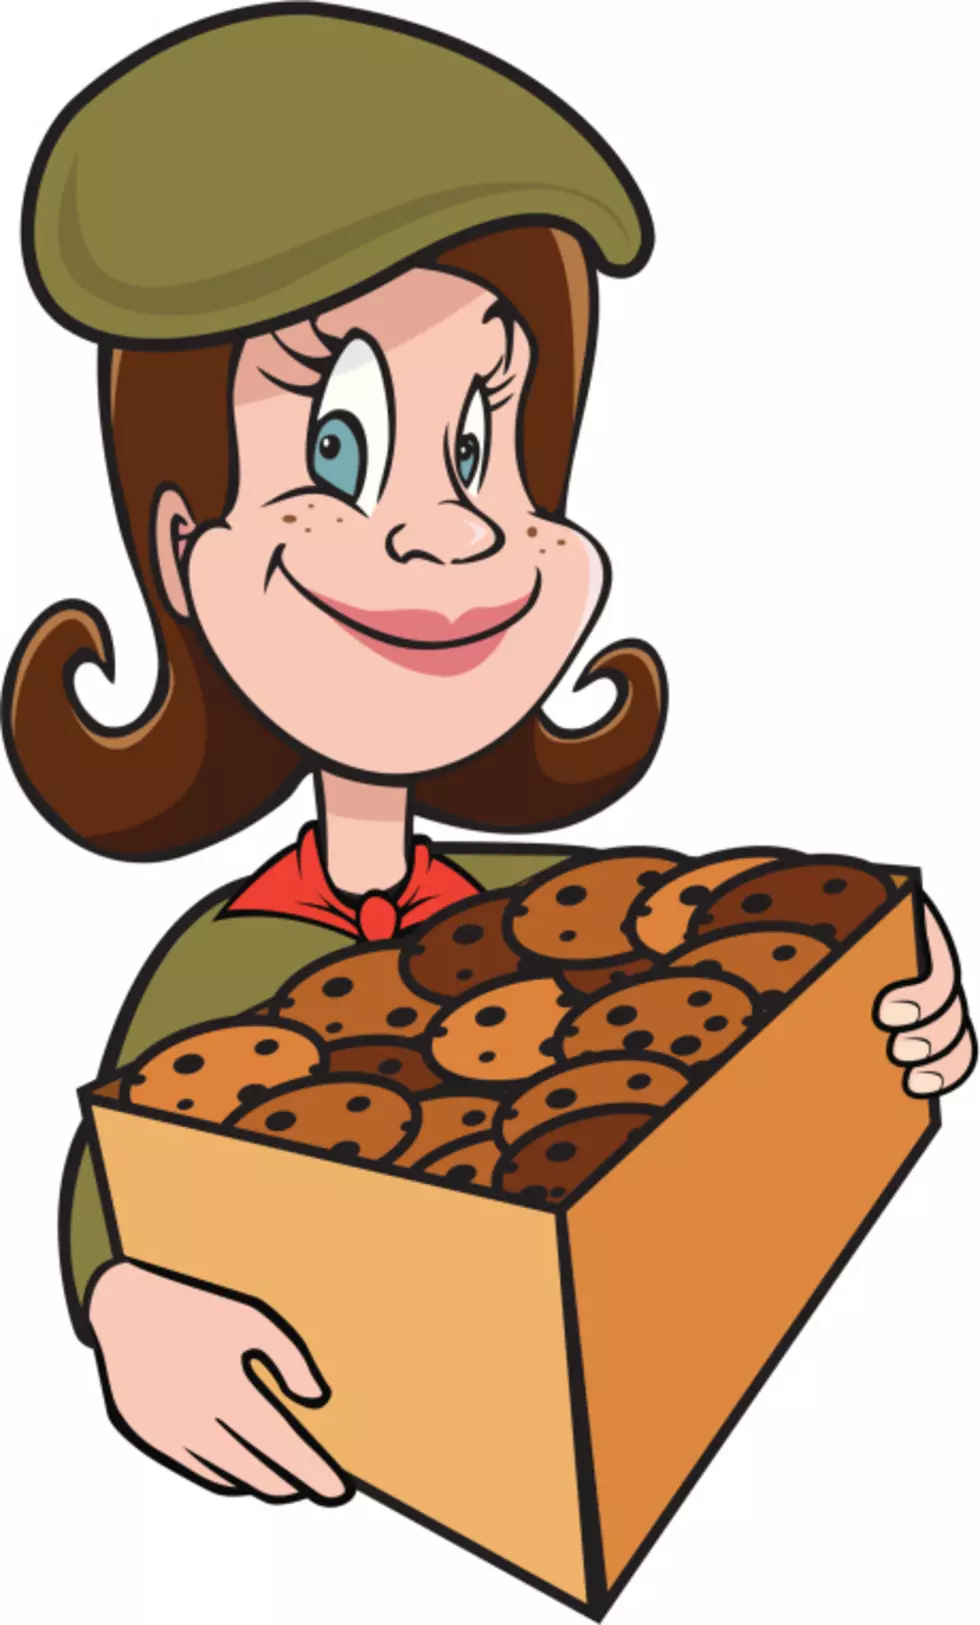 What’s Your Favorite Girl Scout Cookie? [POLL]